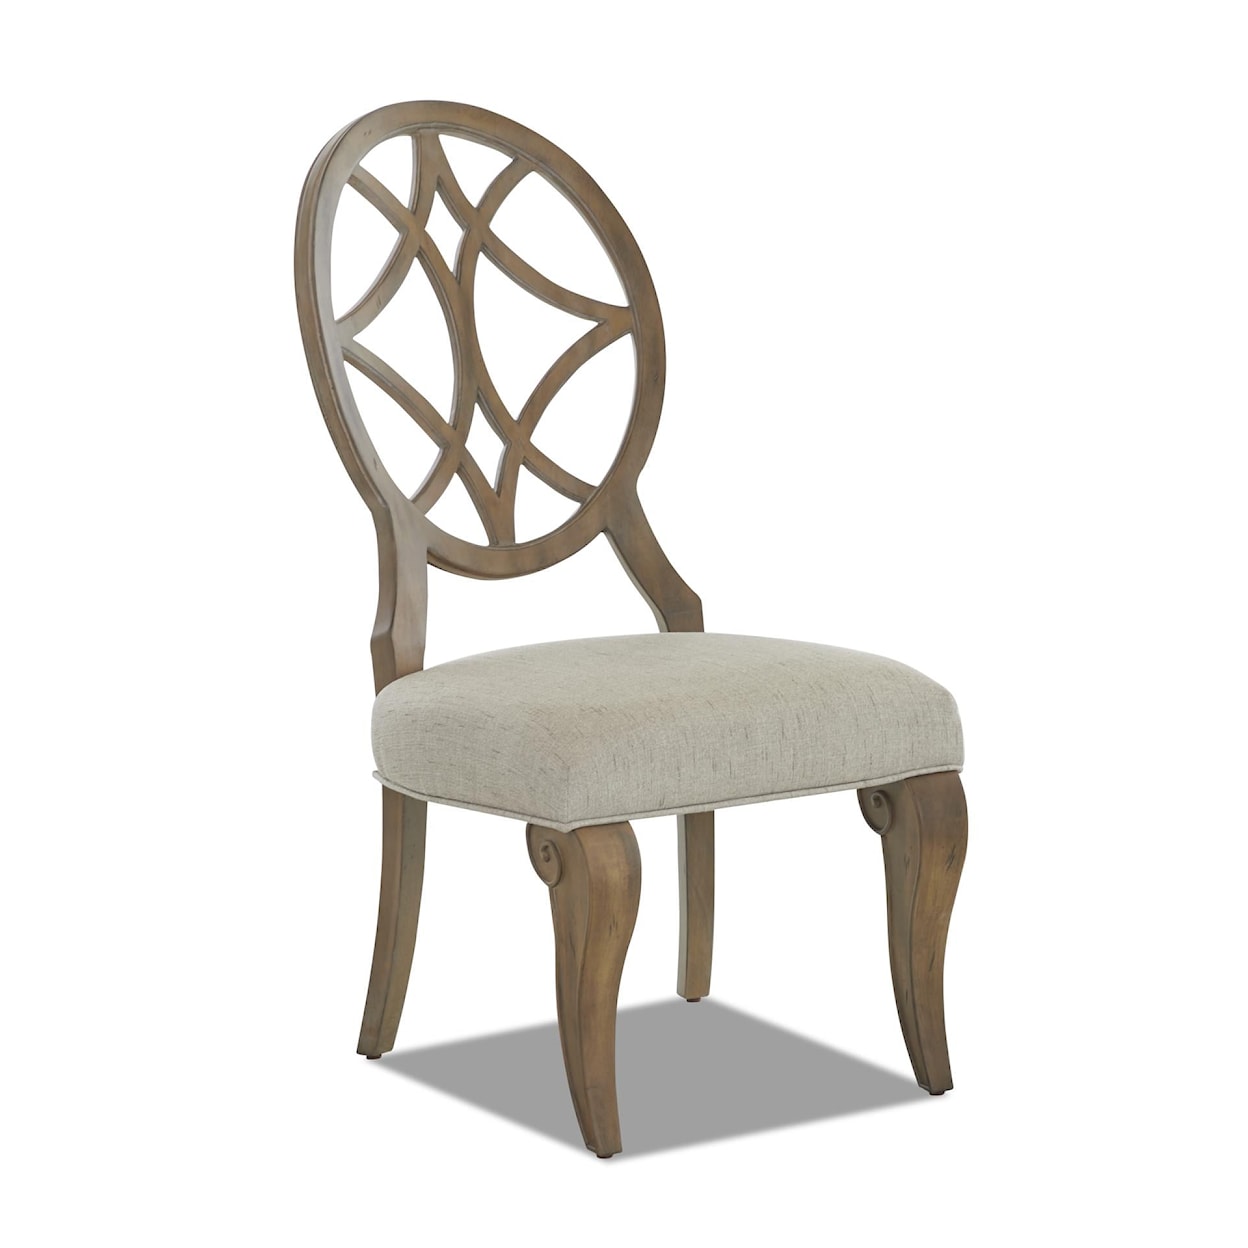 Trisha Yearwood Home Collection by Legacy Classic Jasper County Chair